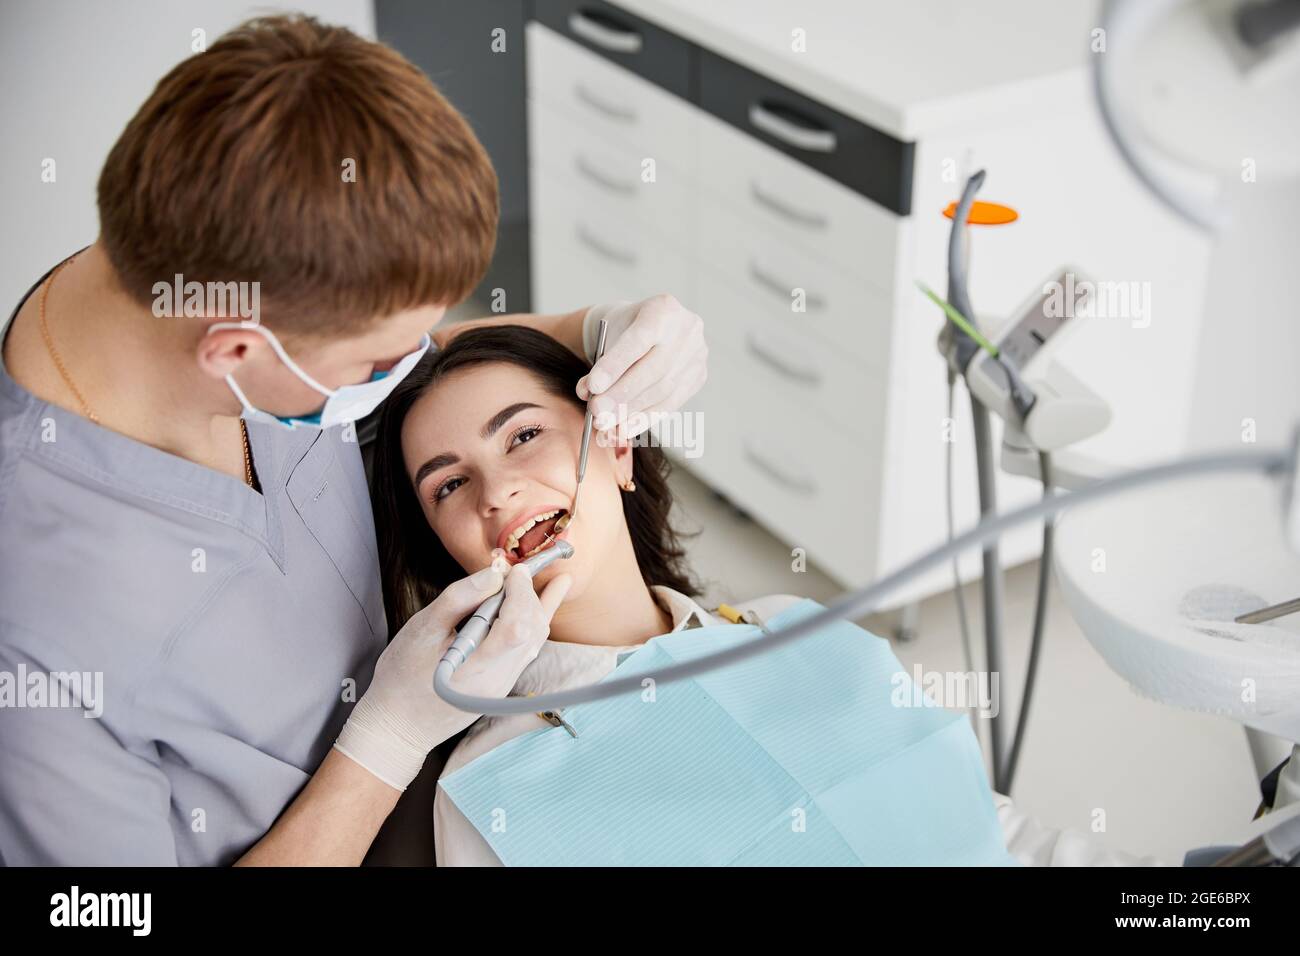 Portrait of smiling girl on a dental chair in dentistry Stock Photo